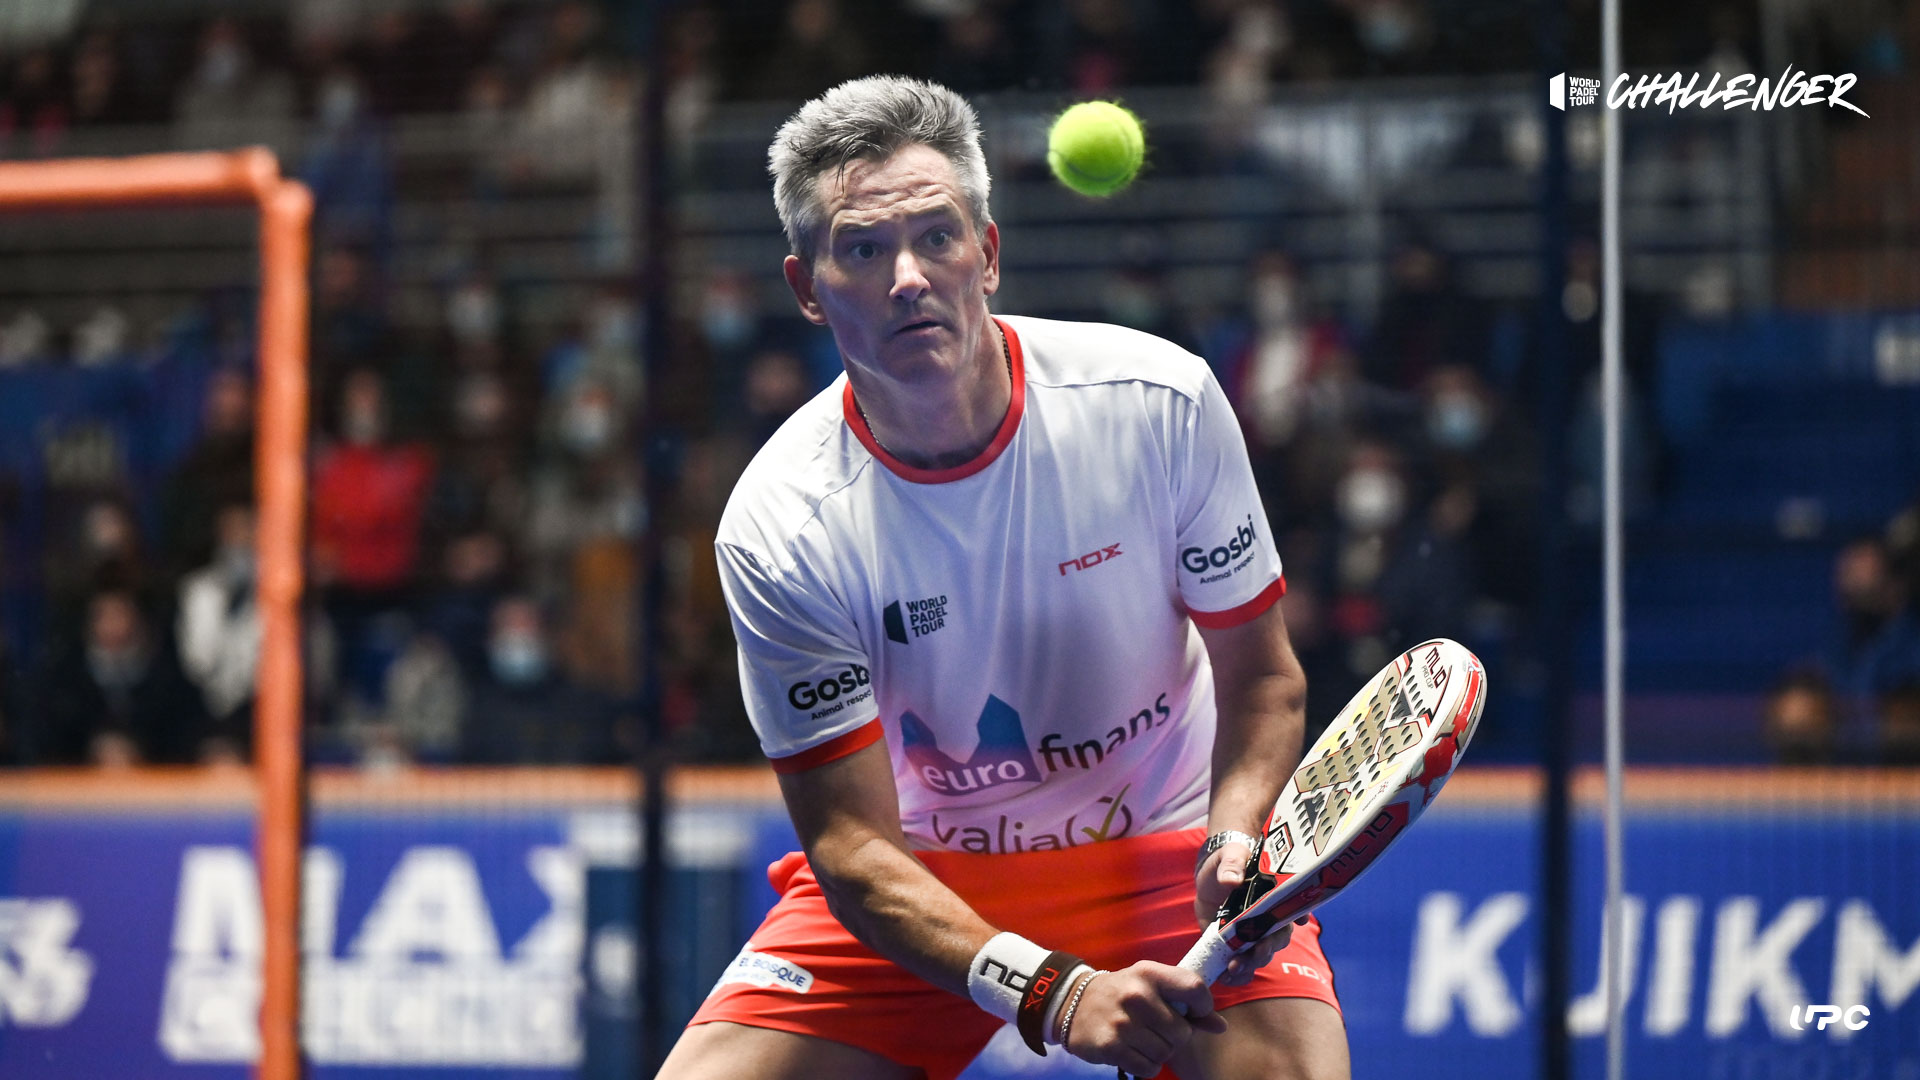 Miguel Lamperti puts on a show at the Getafe Challenger!